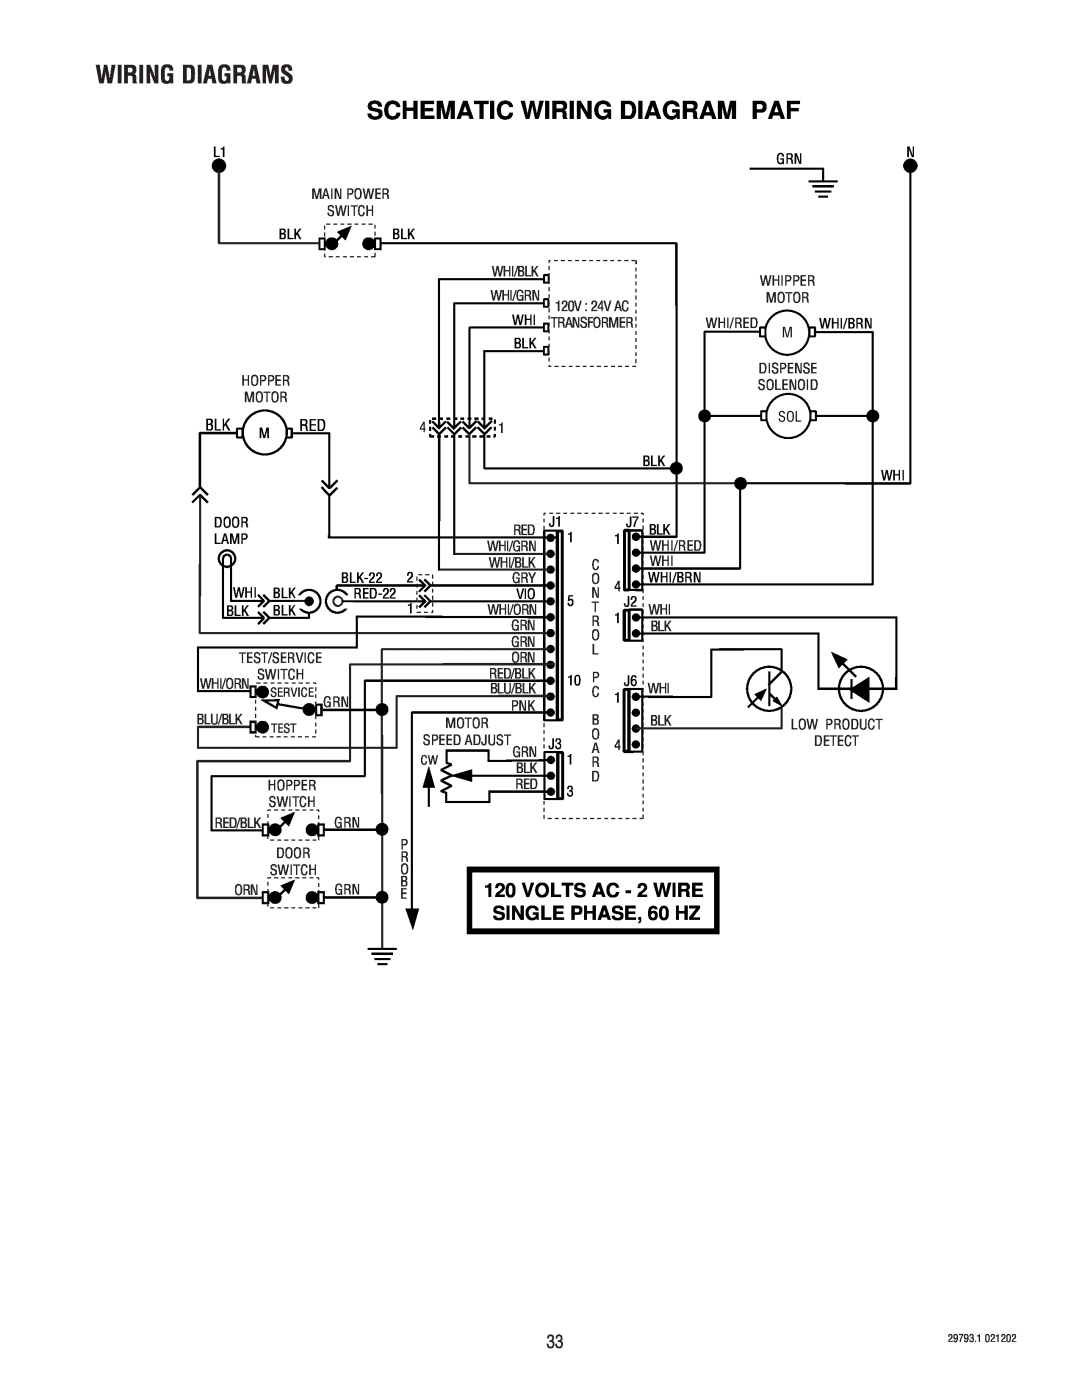 Bunn dispenser service manual Wiring Diagrams, Schematic Wiring Diagram Paf, VOLTS AC - 2 WIRE, SINGLE PHASE, 60 HZ 